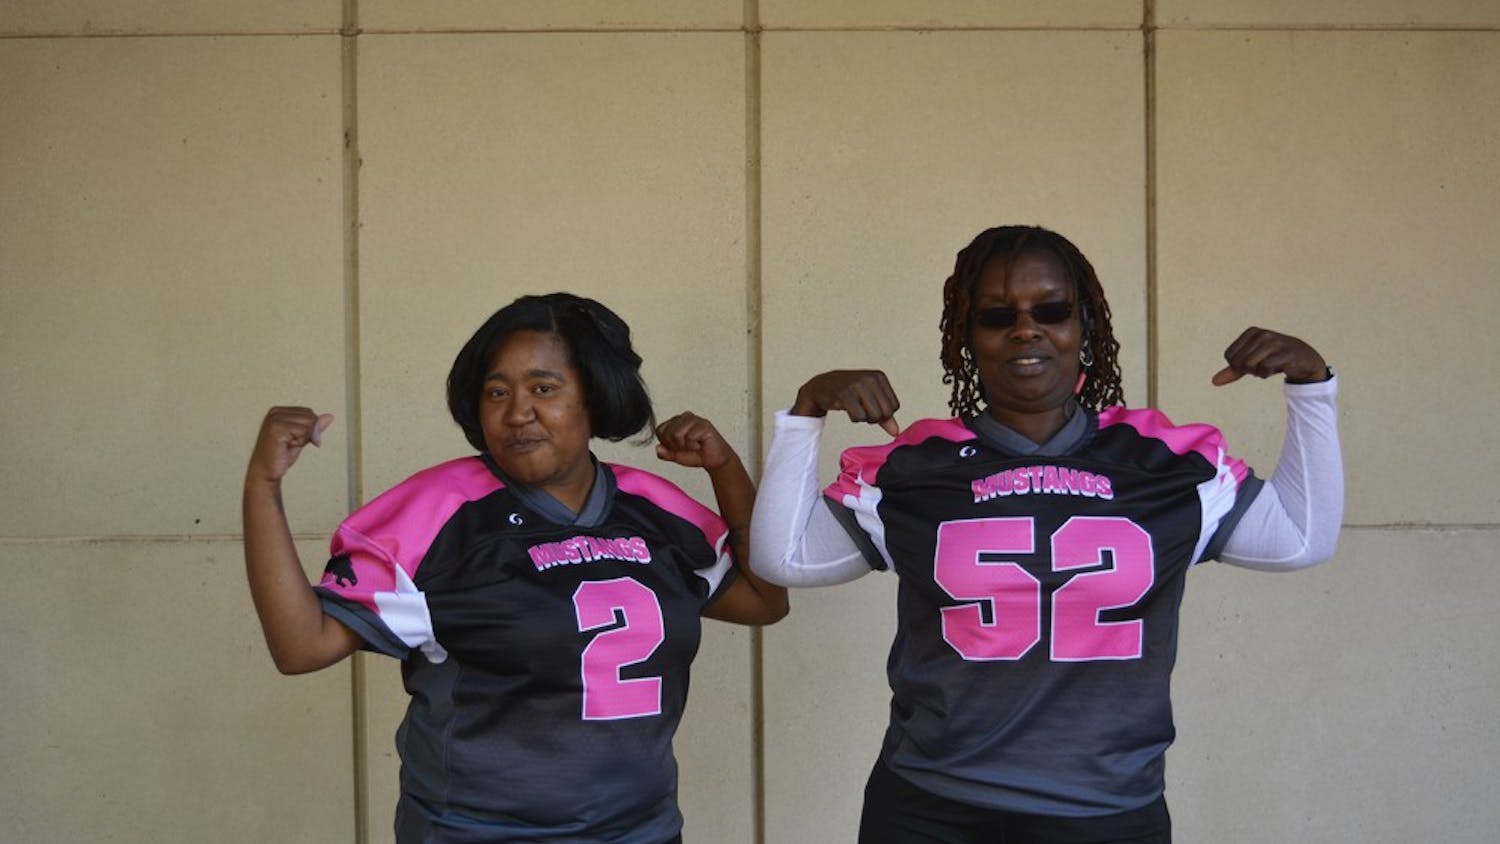 McDougle Middle School's football team, with help from Team Moms BLANK (left) and BLANK, raised money for pink uniforms and a donation to the Susan G. Komen Foundation, in support of Breast Cancer Awareness.